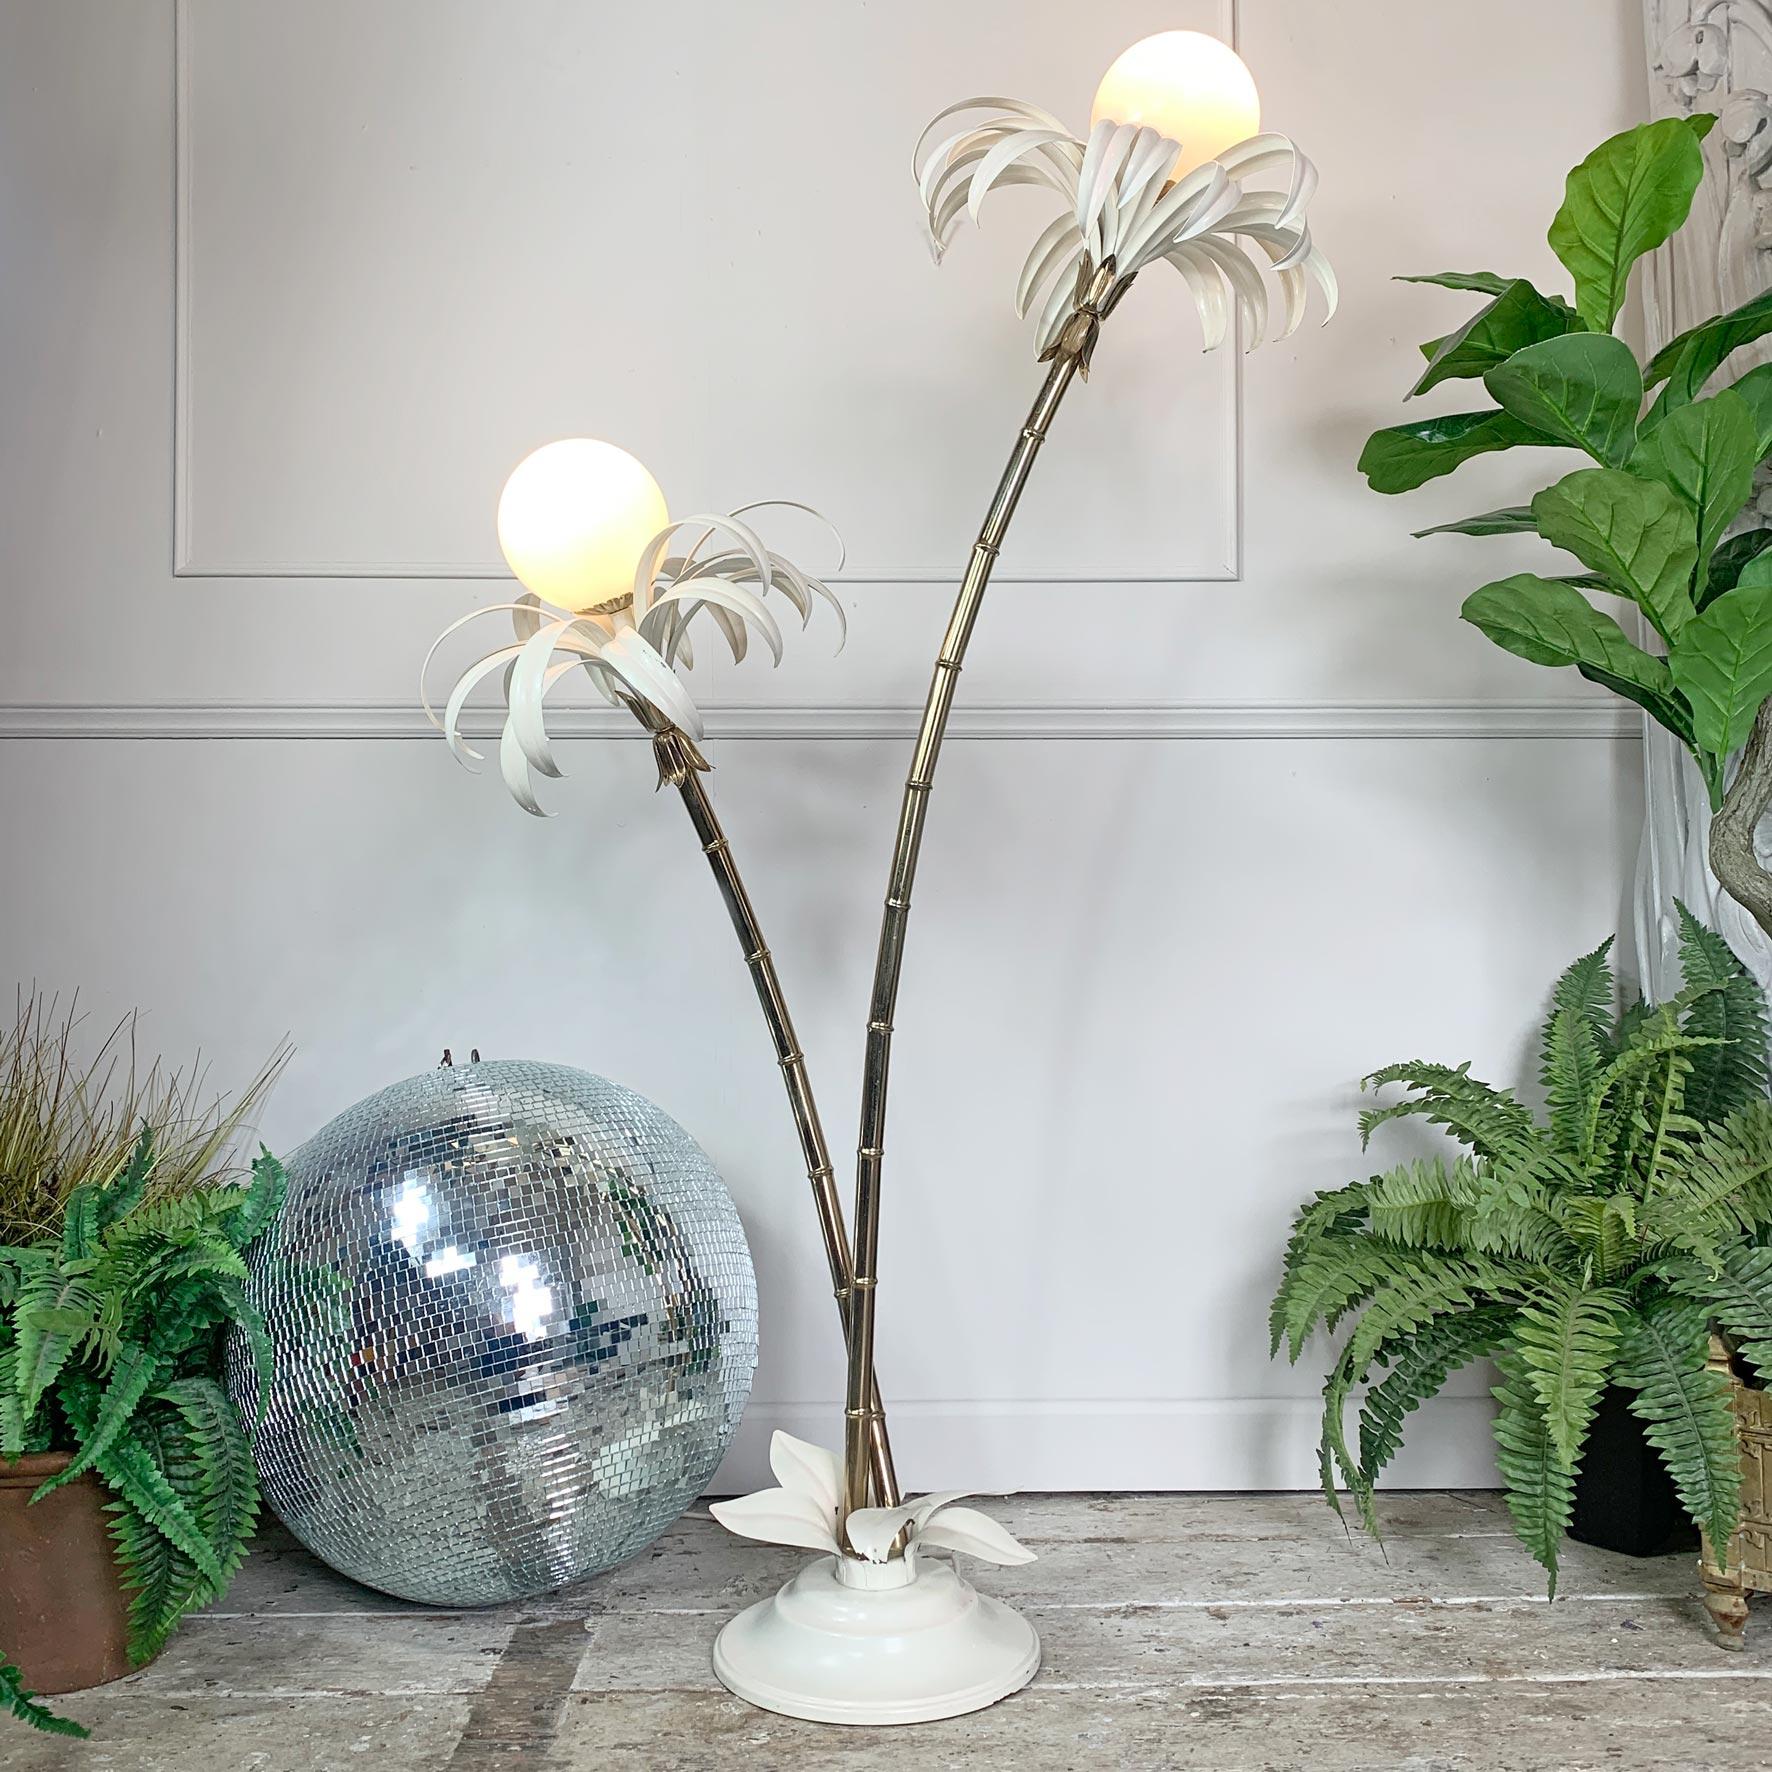 Beautifully elegant palm floor lamp, by Sergio Terzani. Italy, dating from the 1970's

This is a tall and striking Italian floor lamp design, depicting two gilt faux bamboo stems with full soft white palm fronds. The fronds have a dusted pale pink